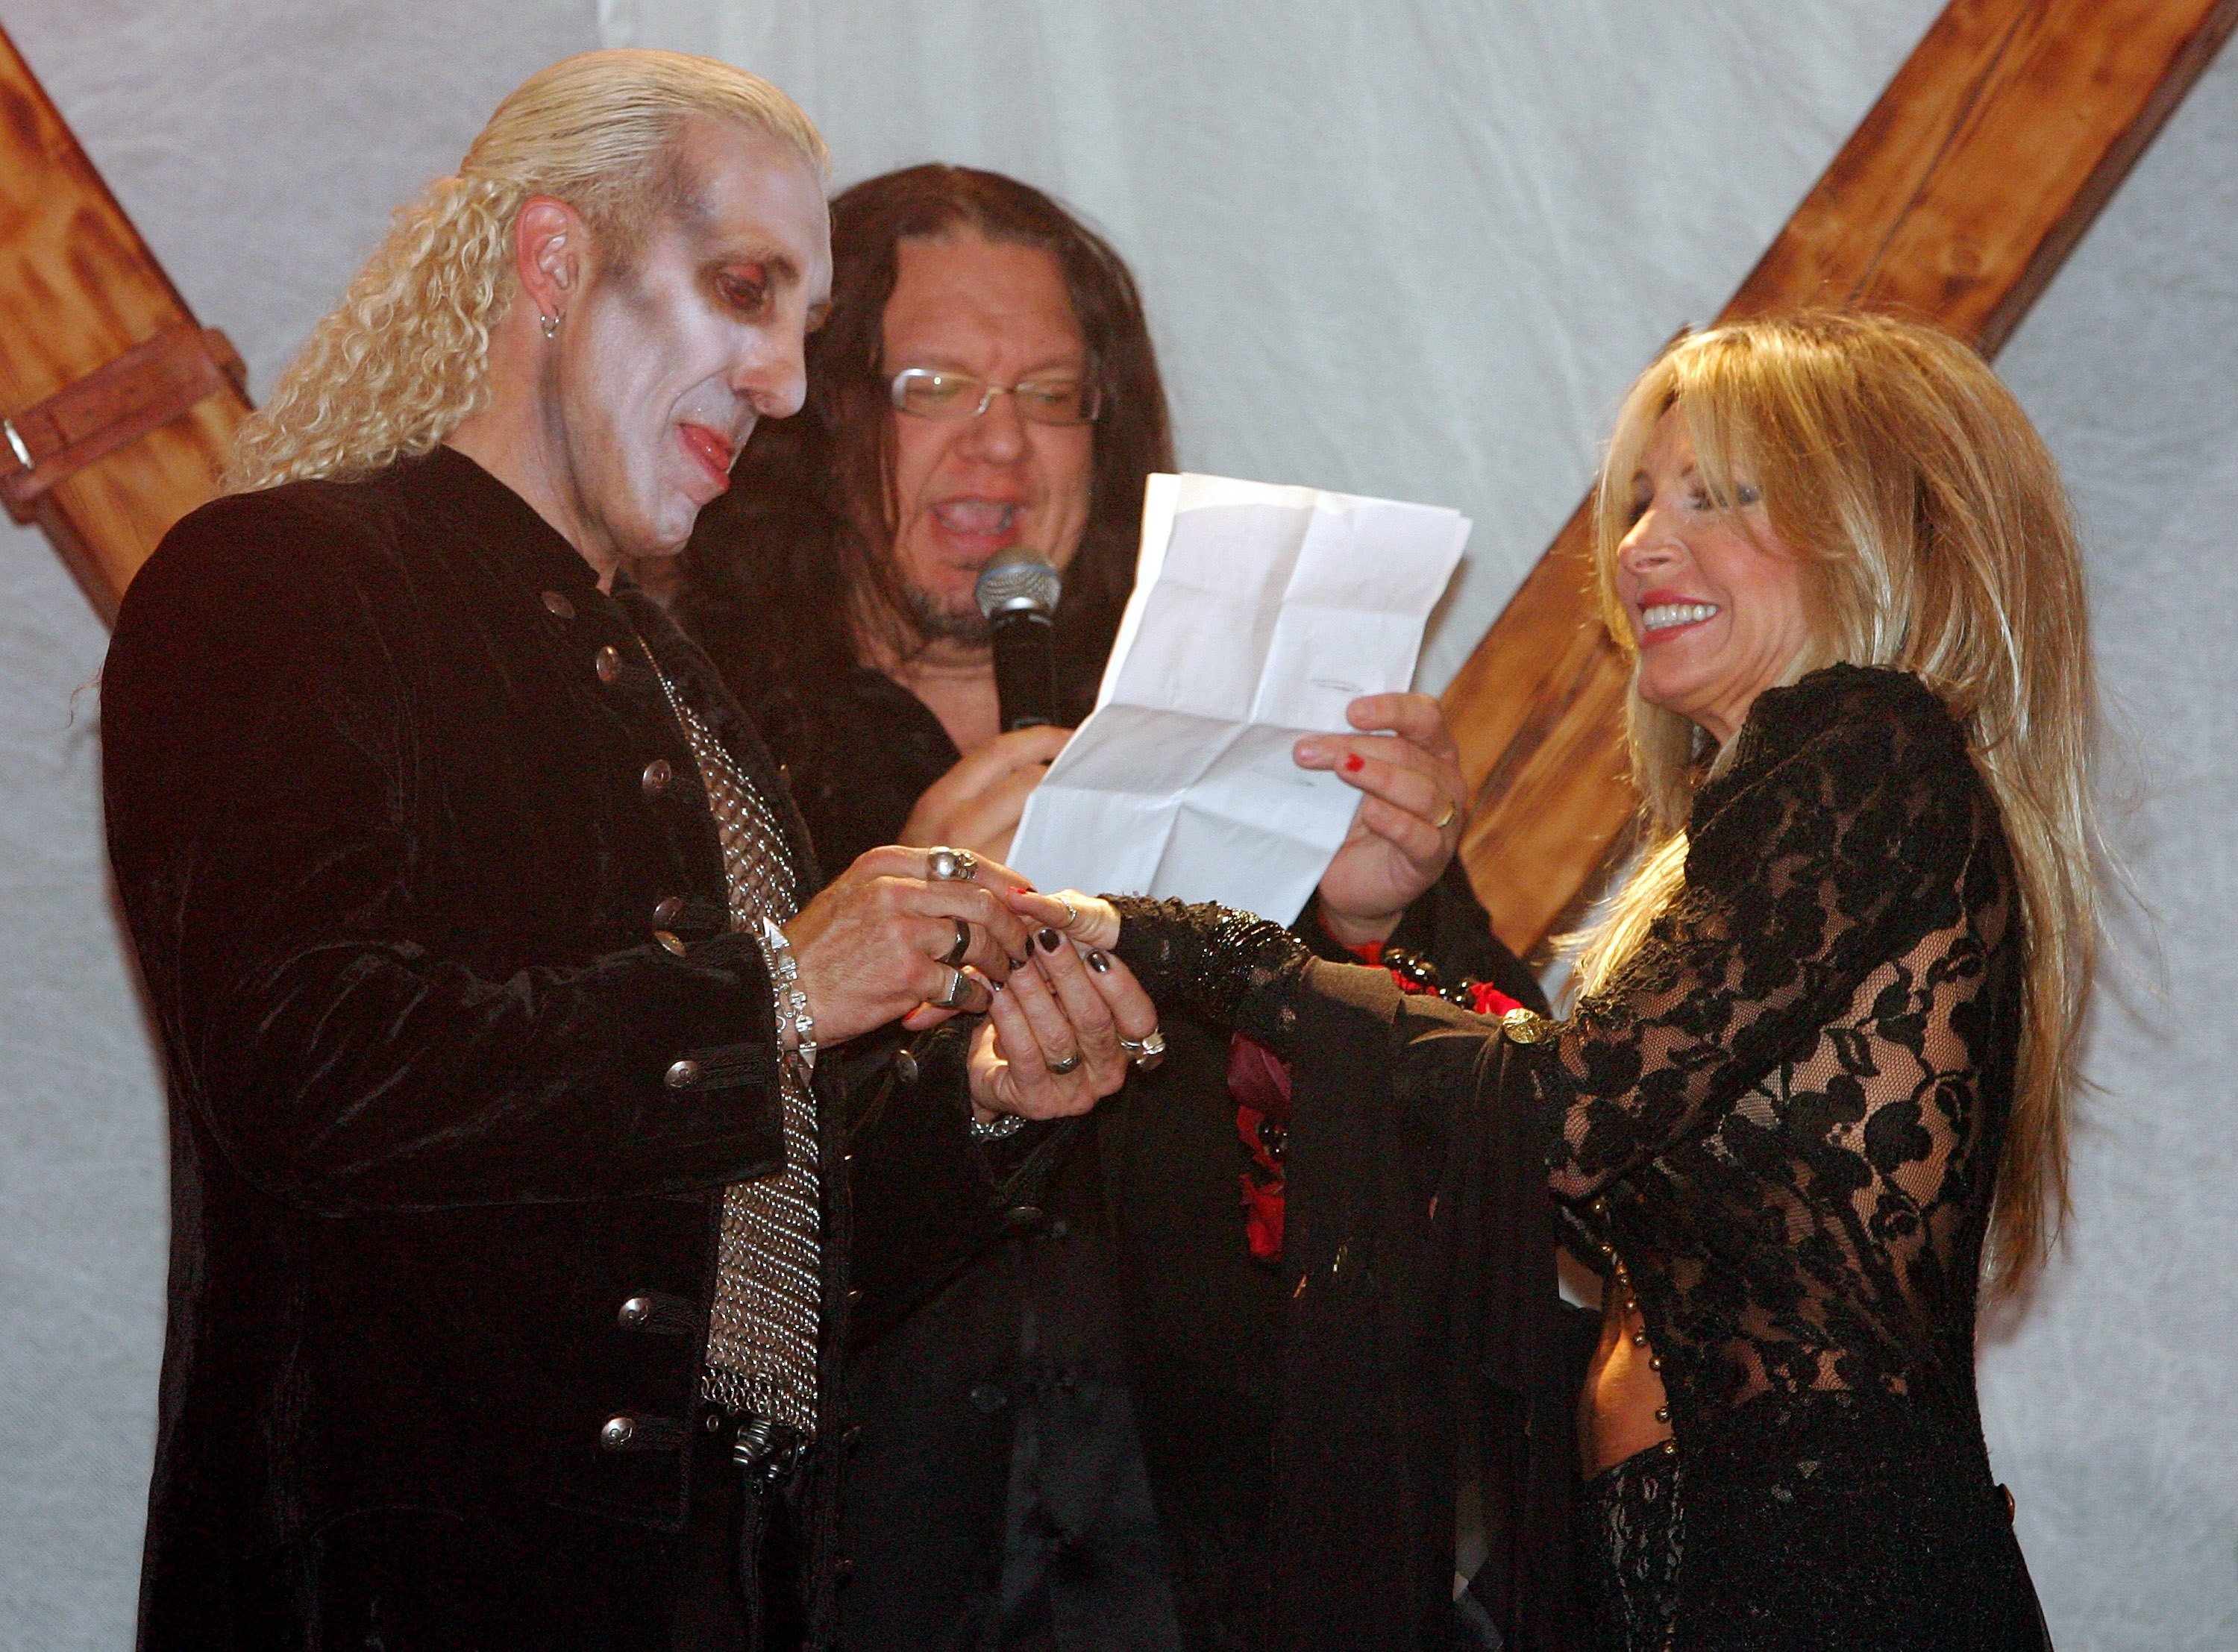 Penn Jillette (C) officiating the wedding vow renewal ceremony for Twisted Sister singer Dee Snider (L) and Suzette Snider at the Hard Rock Hotel & Casino on October 21, 2006, in Las Vegas, Nevada. | Source: Getty Images